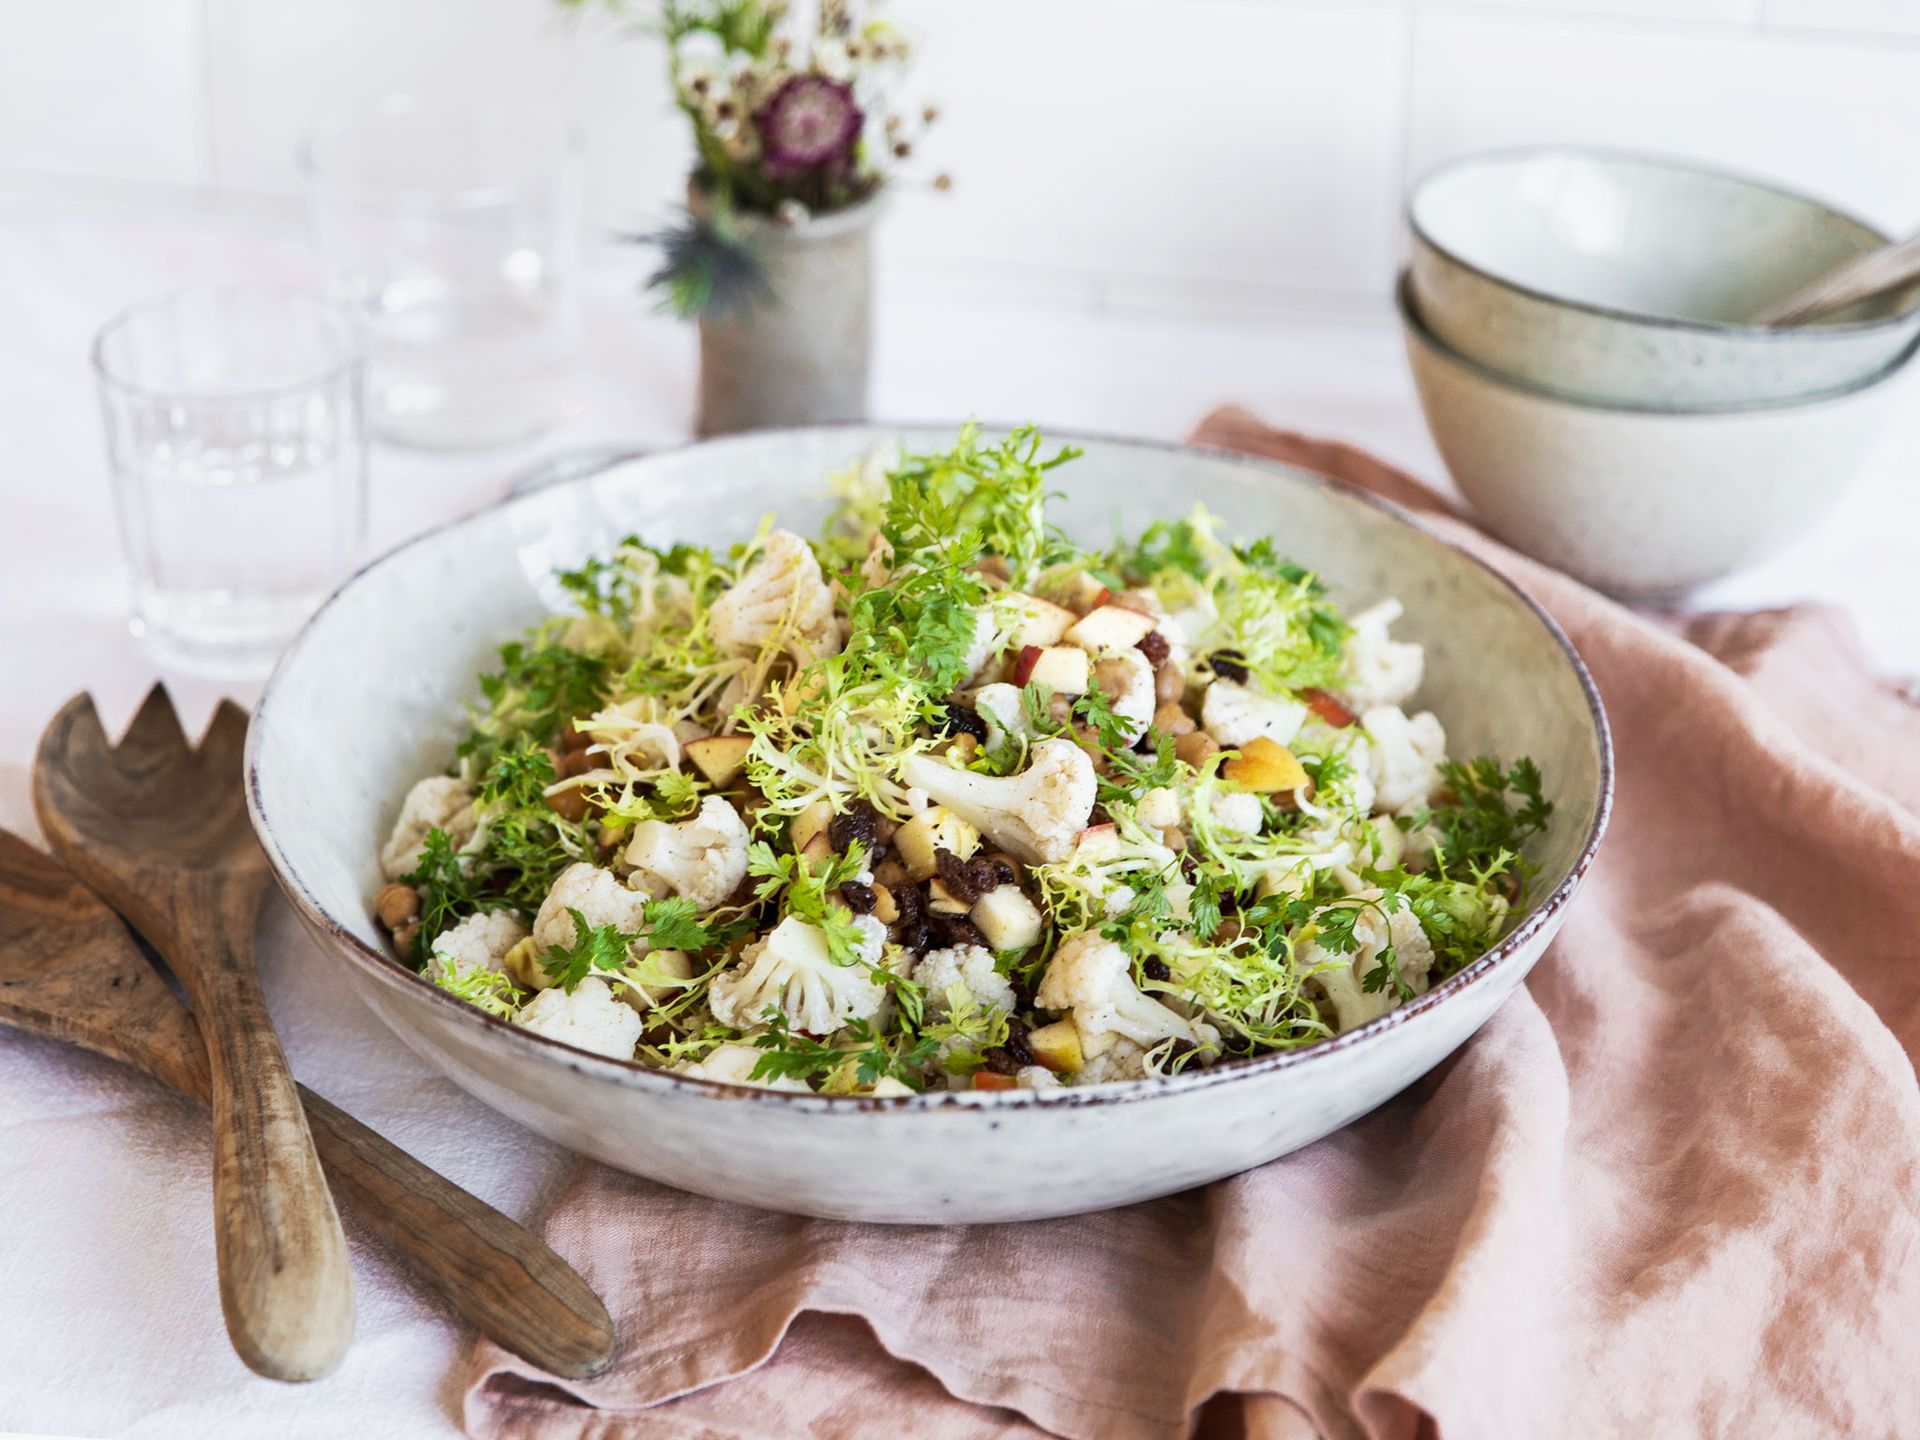 Cauliflower salad with apples and roasted chickpeas